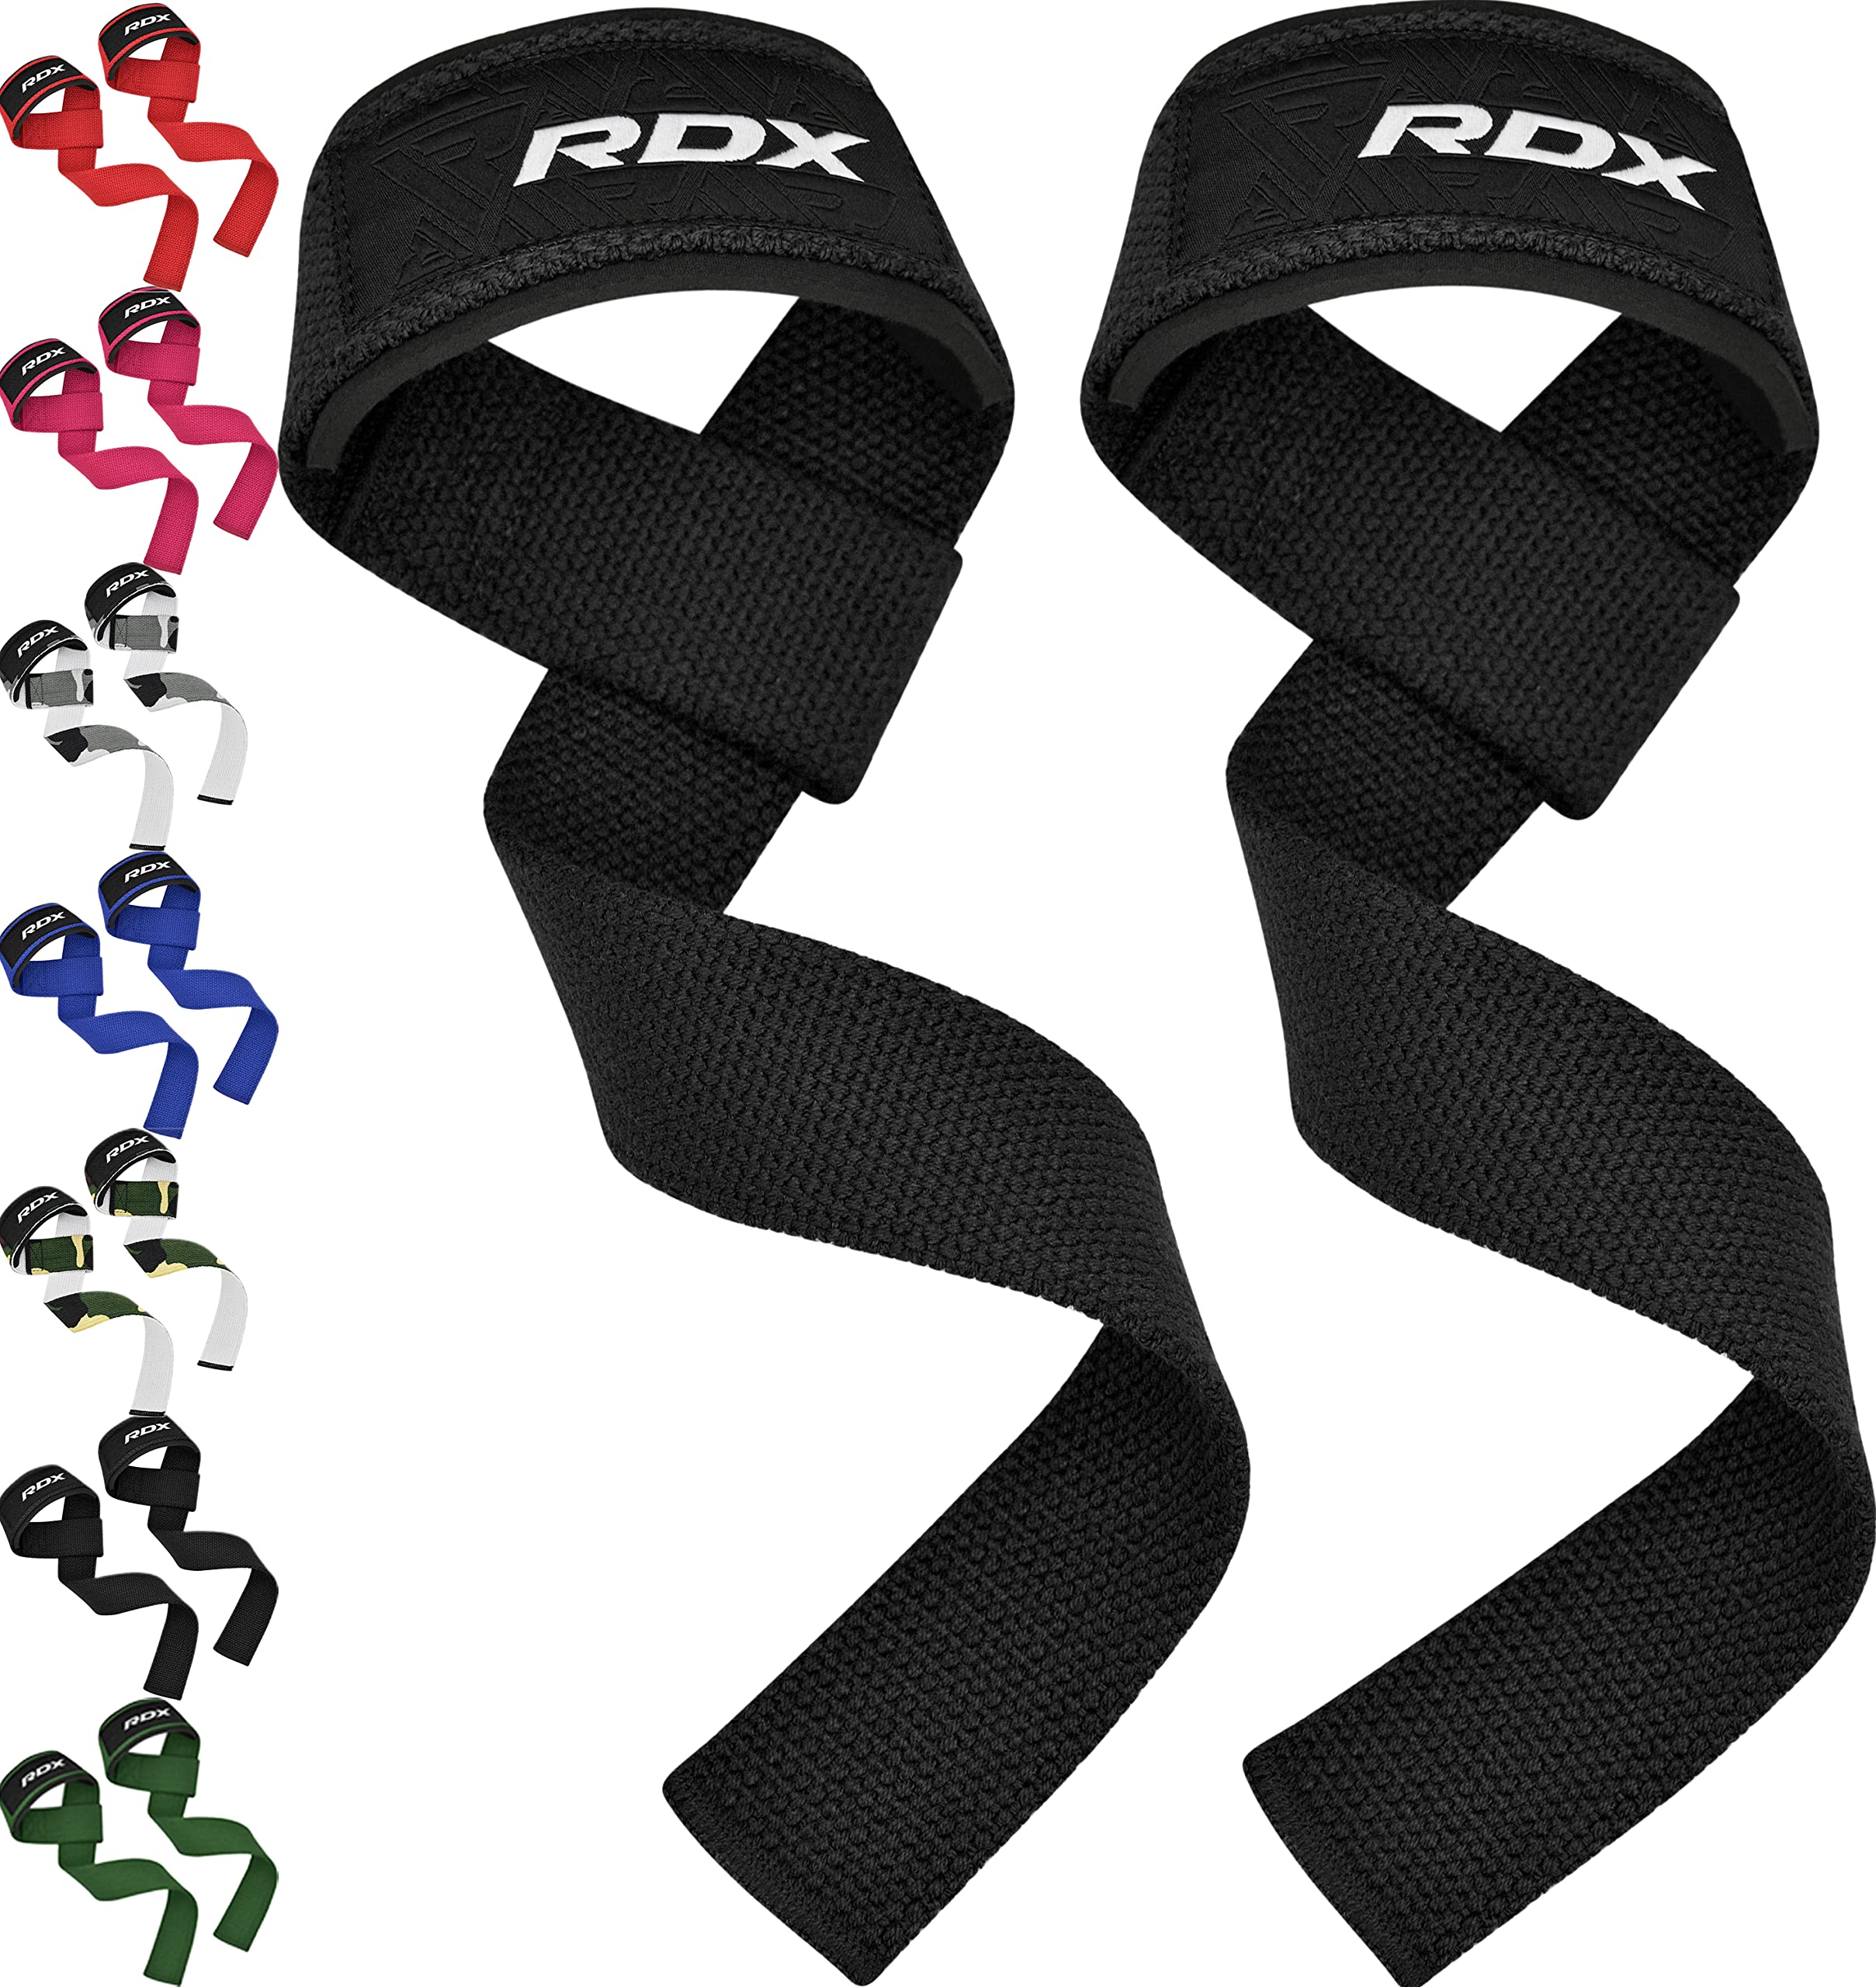 Lifting Straps (1 Pair) - Padded Wrist Support Wraps - for Powerlifting,  Bodybuilding, Gym Workout, Strength Training, Deadlifts & Fitness Workout